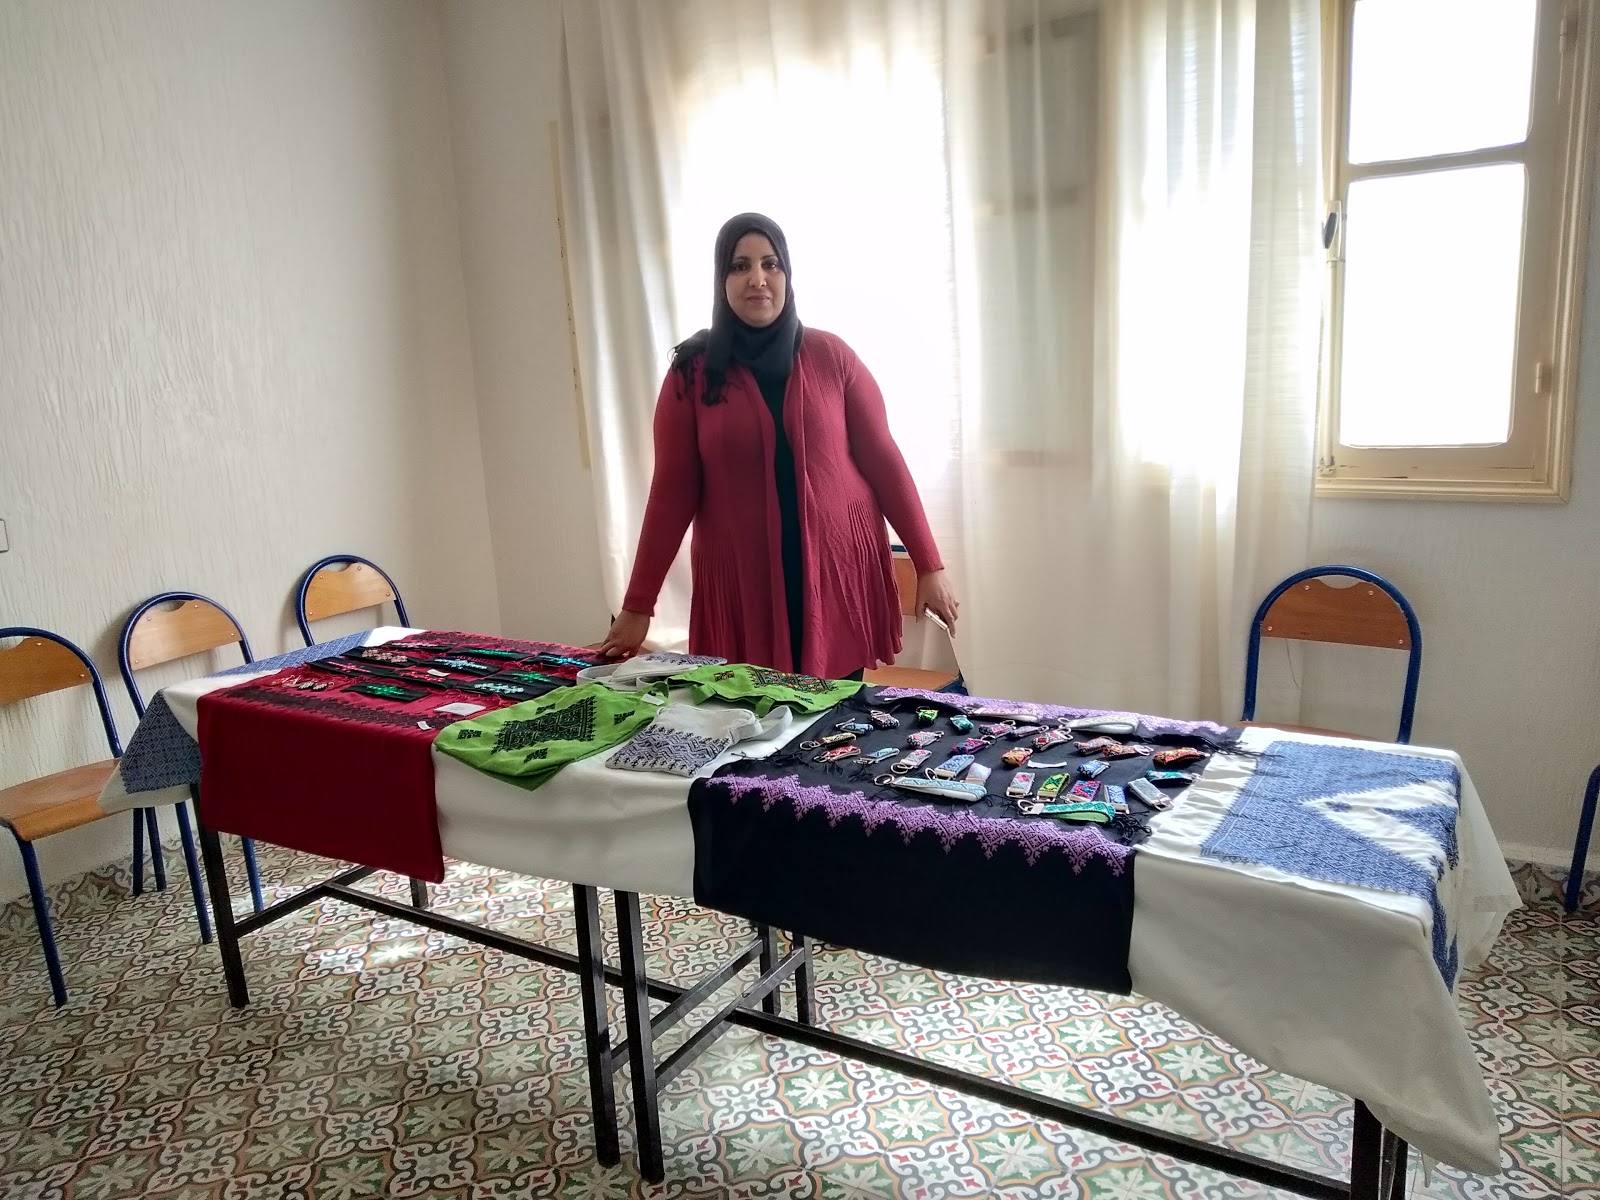 Woman showing the artisan crafts made at Nzala Women's Cooperative in Morocco